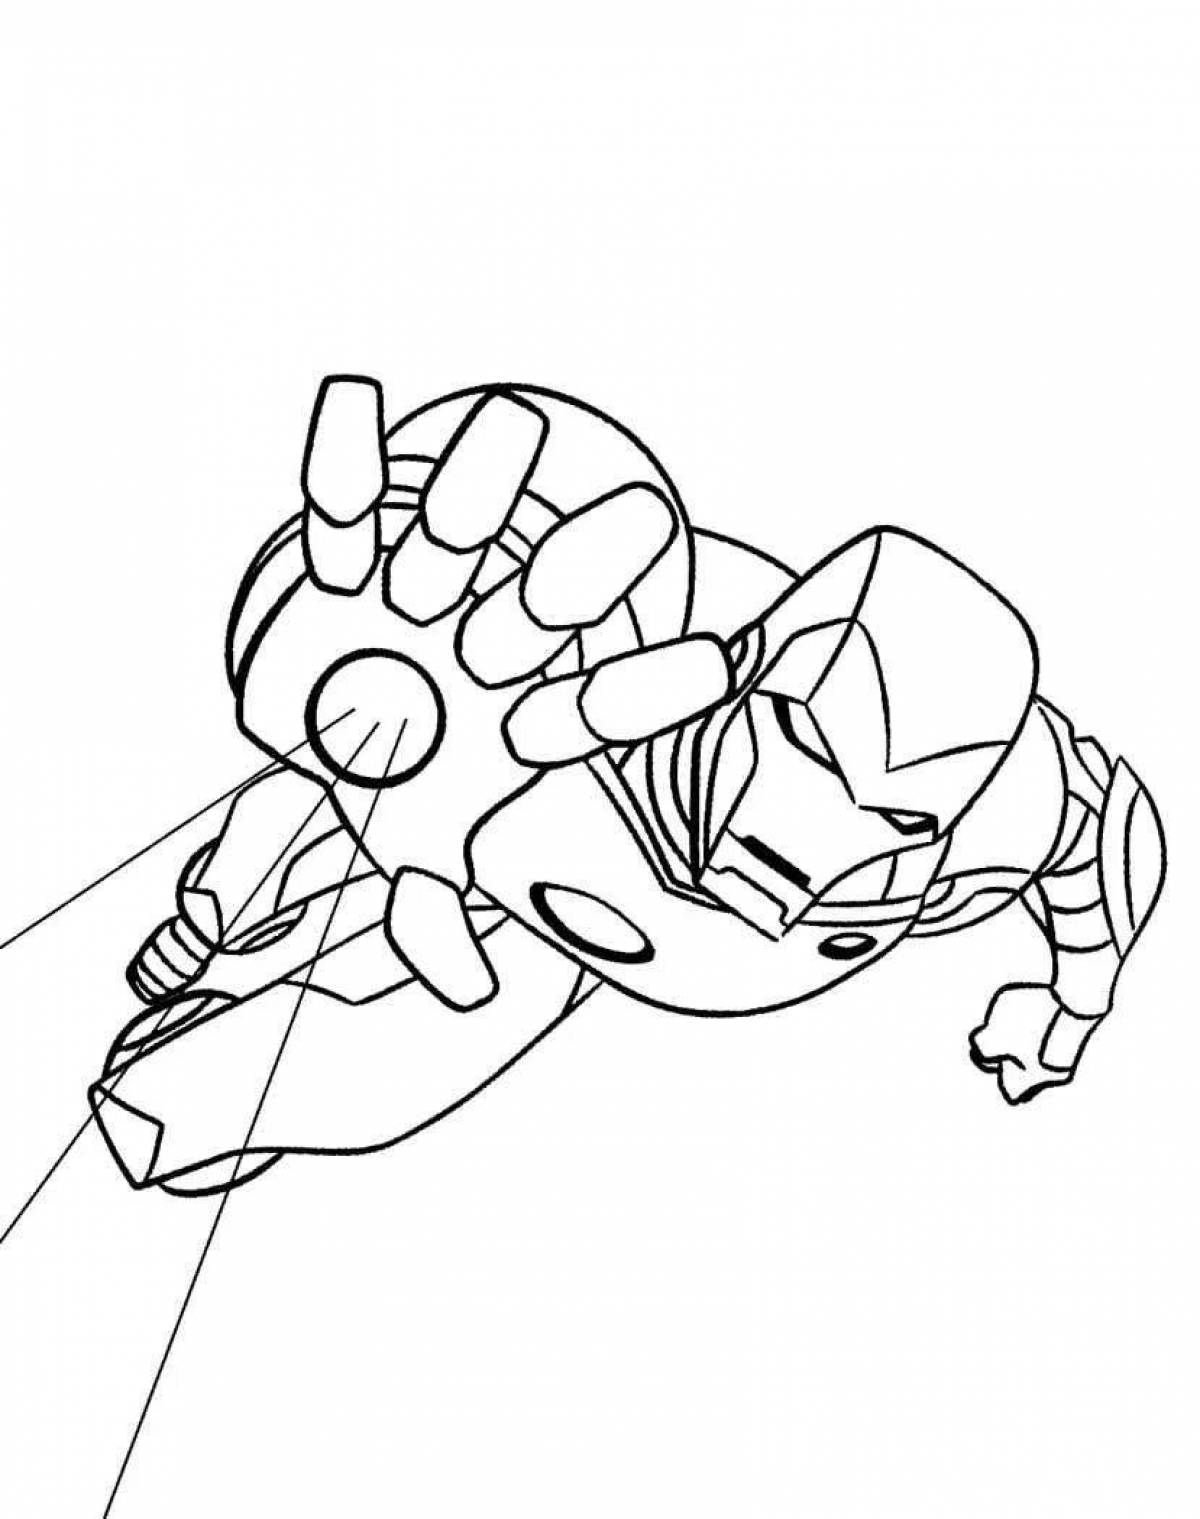 Strong iron spider coloring page